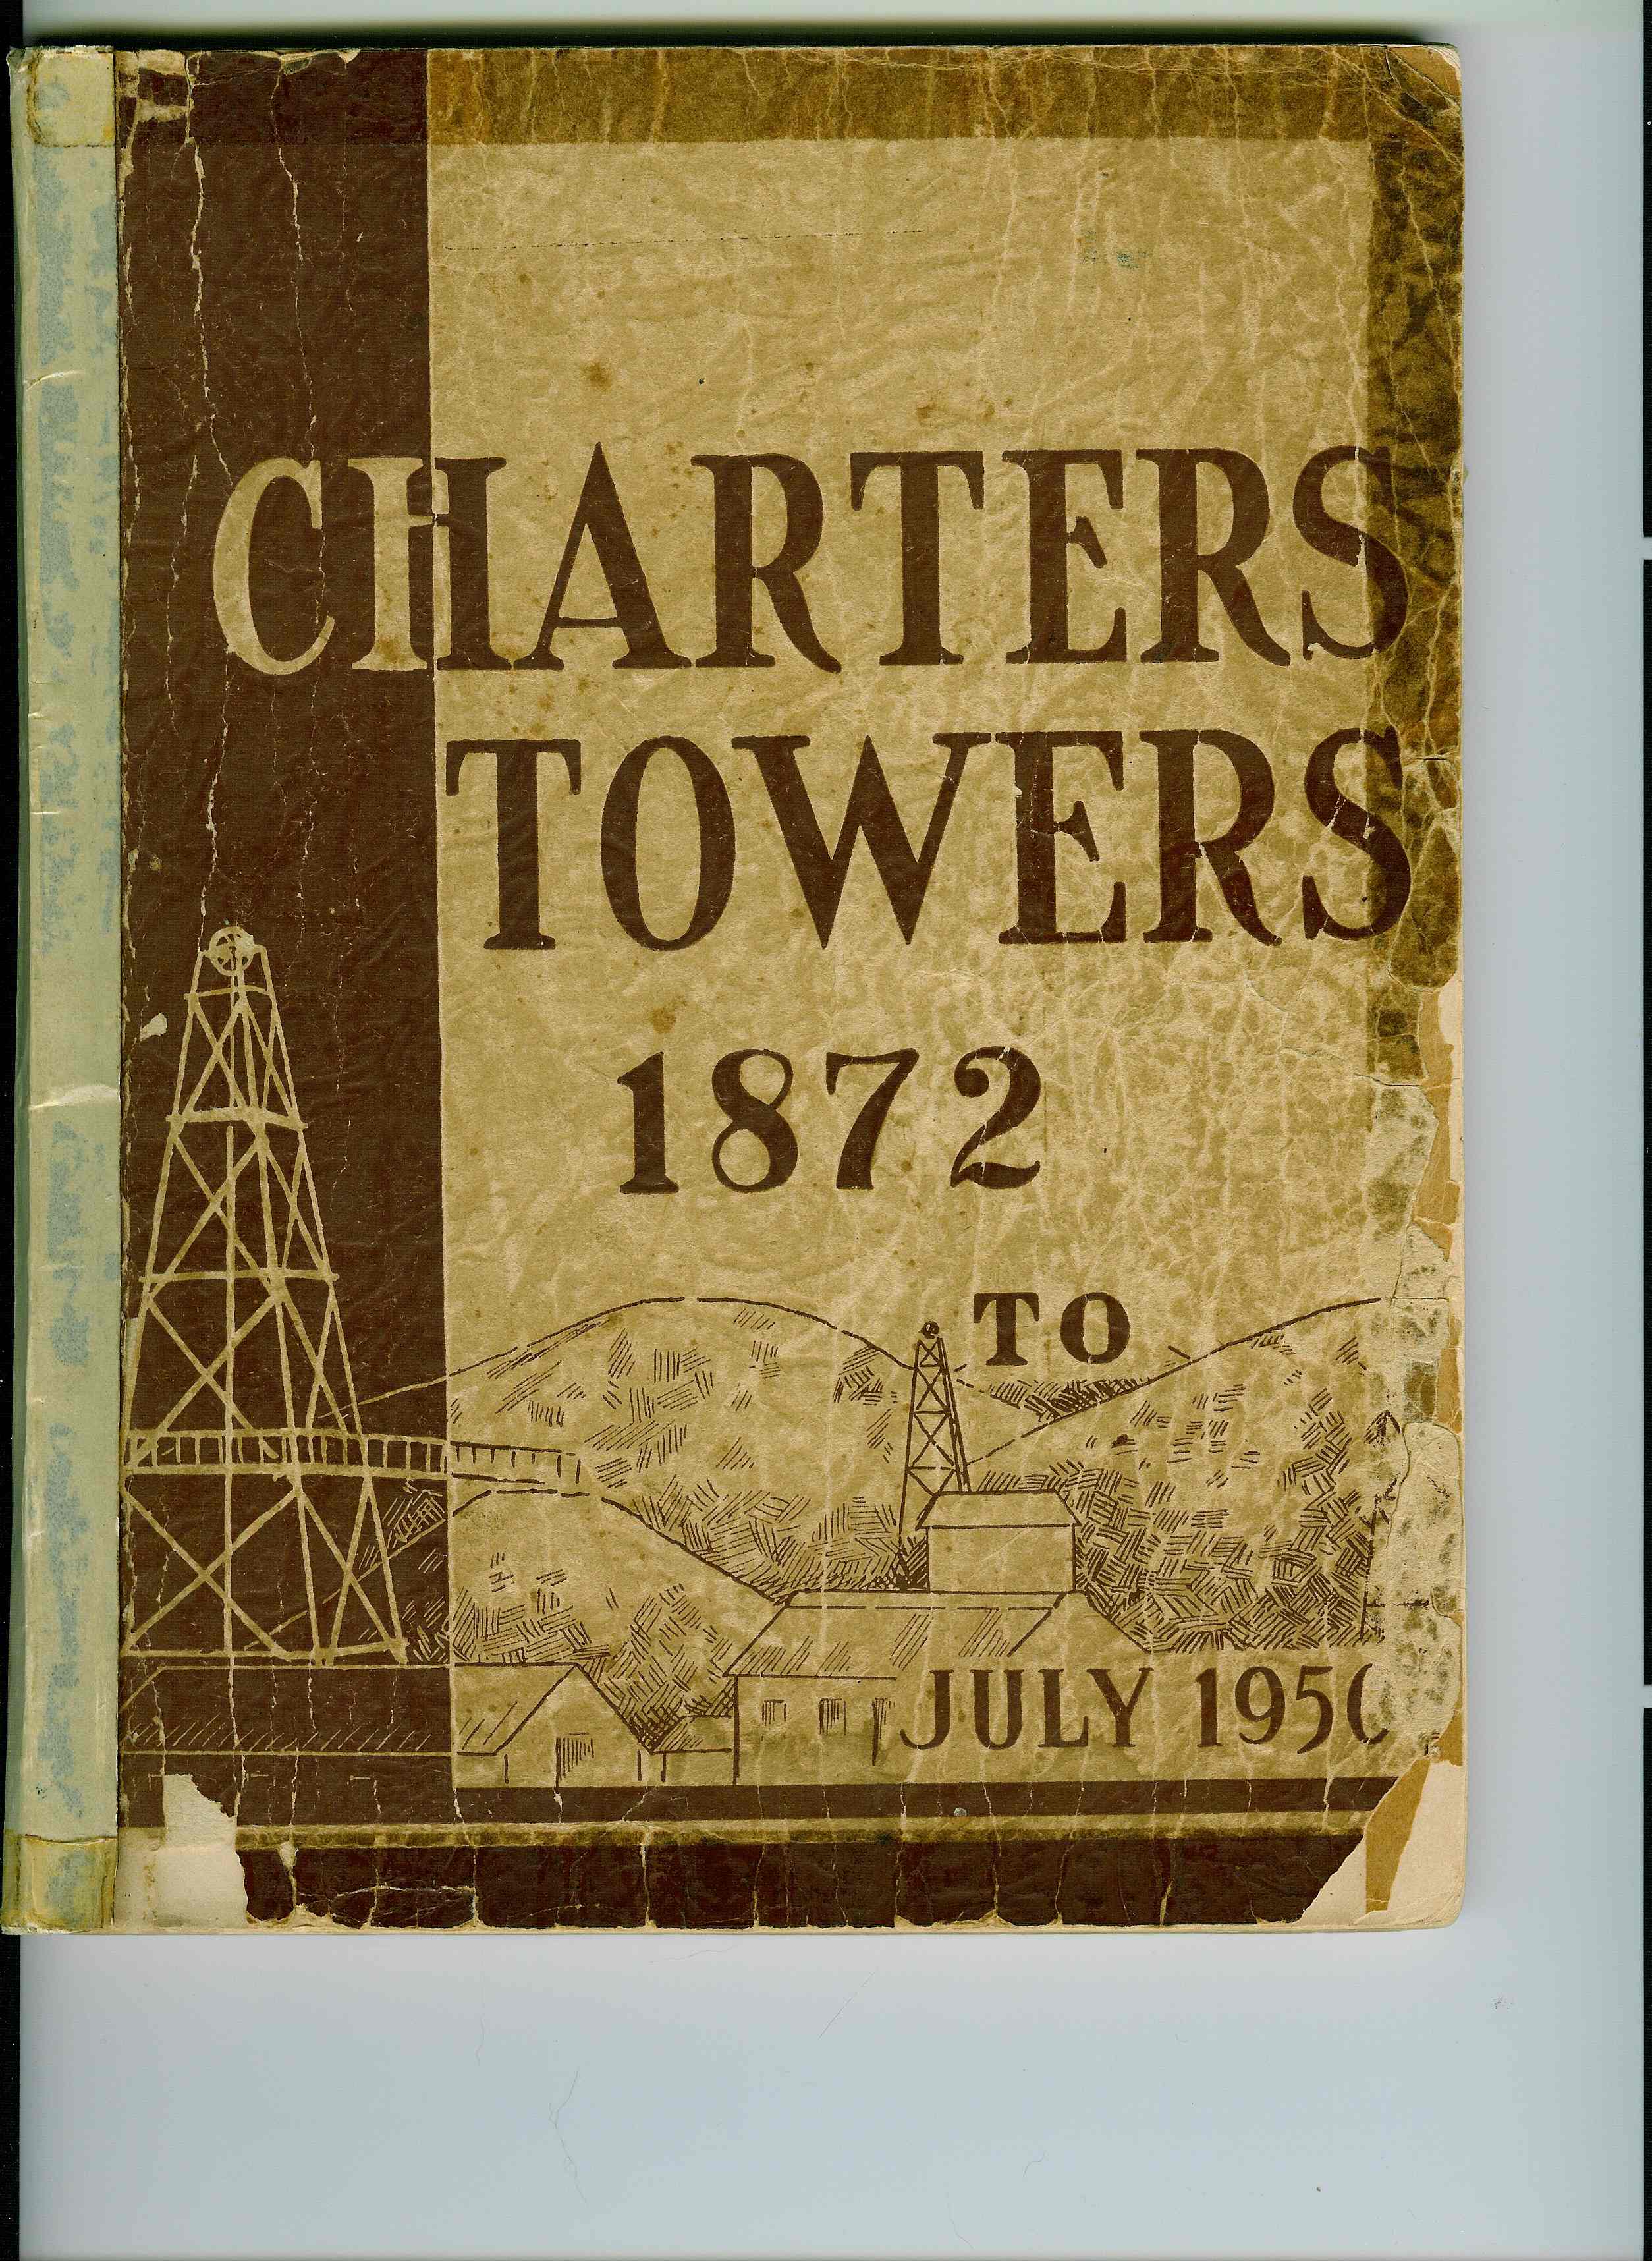 Charters Towers 1872 to July 1950